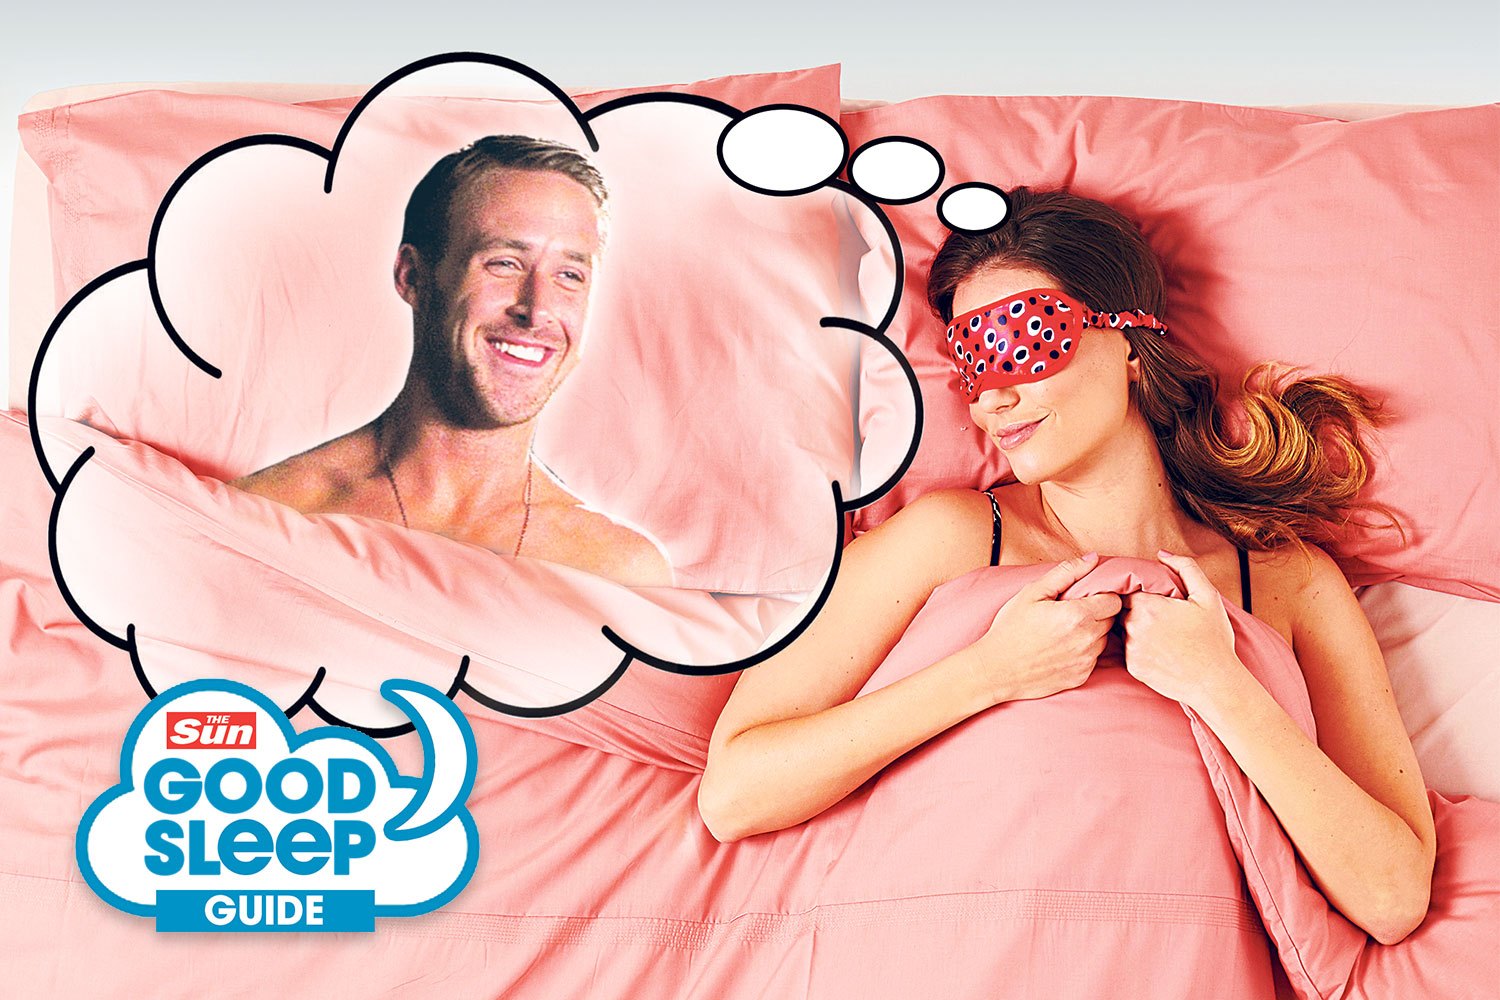  In the third instalment of our Good Sleep Guide, we look at how dreams affect our sleep quality